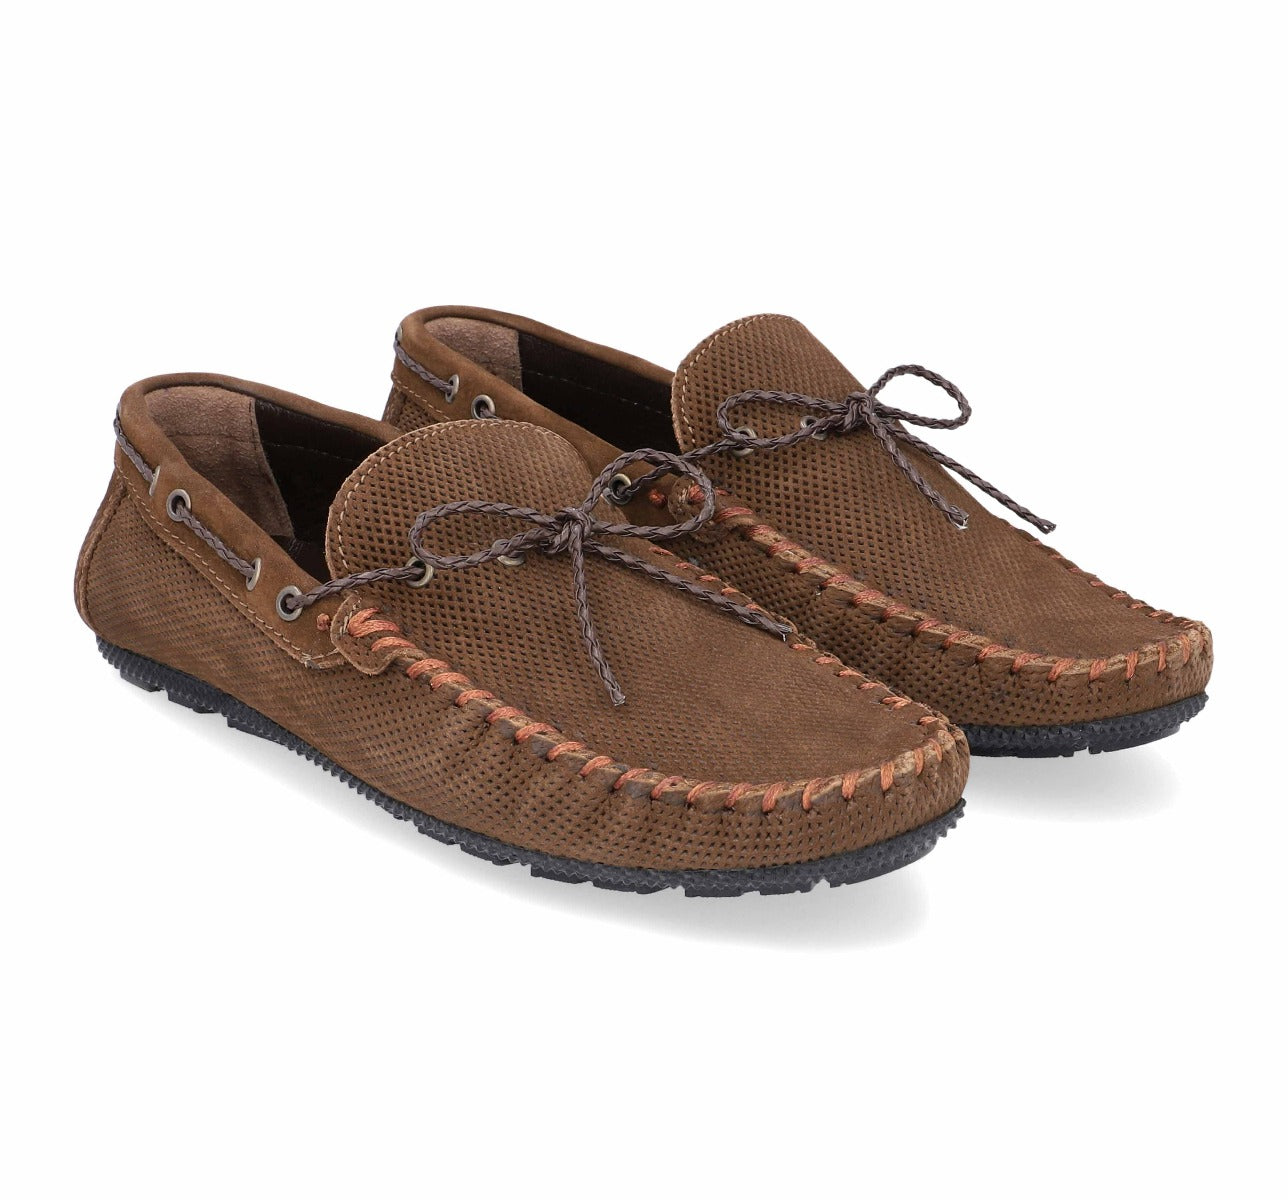 Barefoot Brown Loafers Lace Up Suede For Men 1080